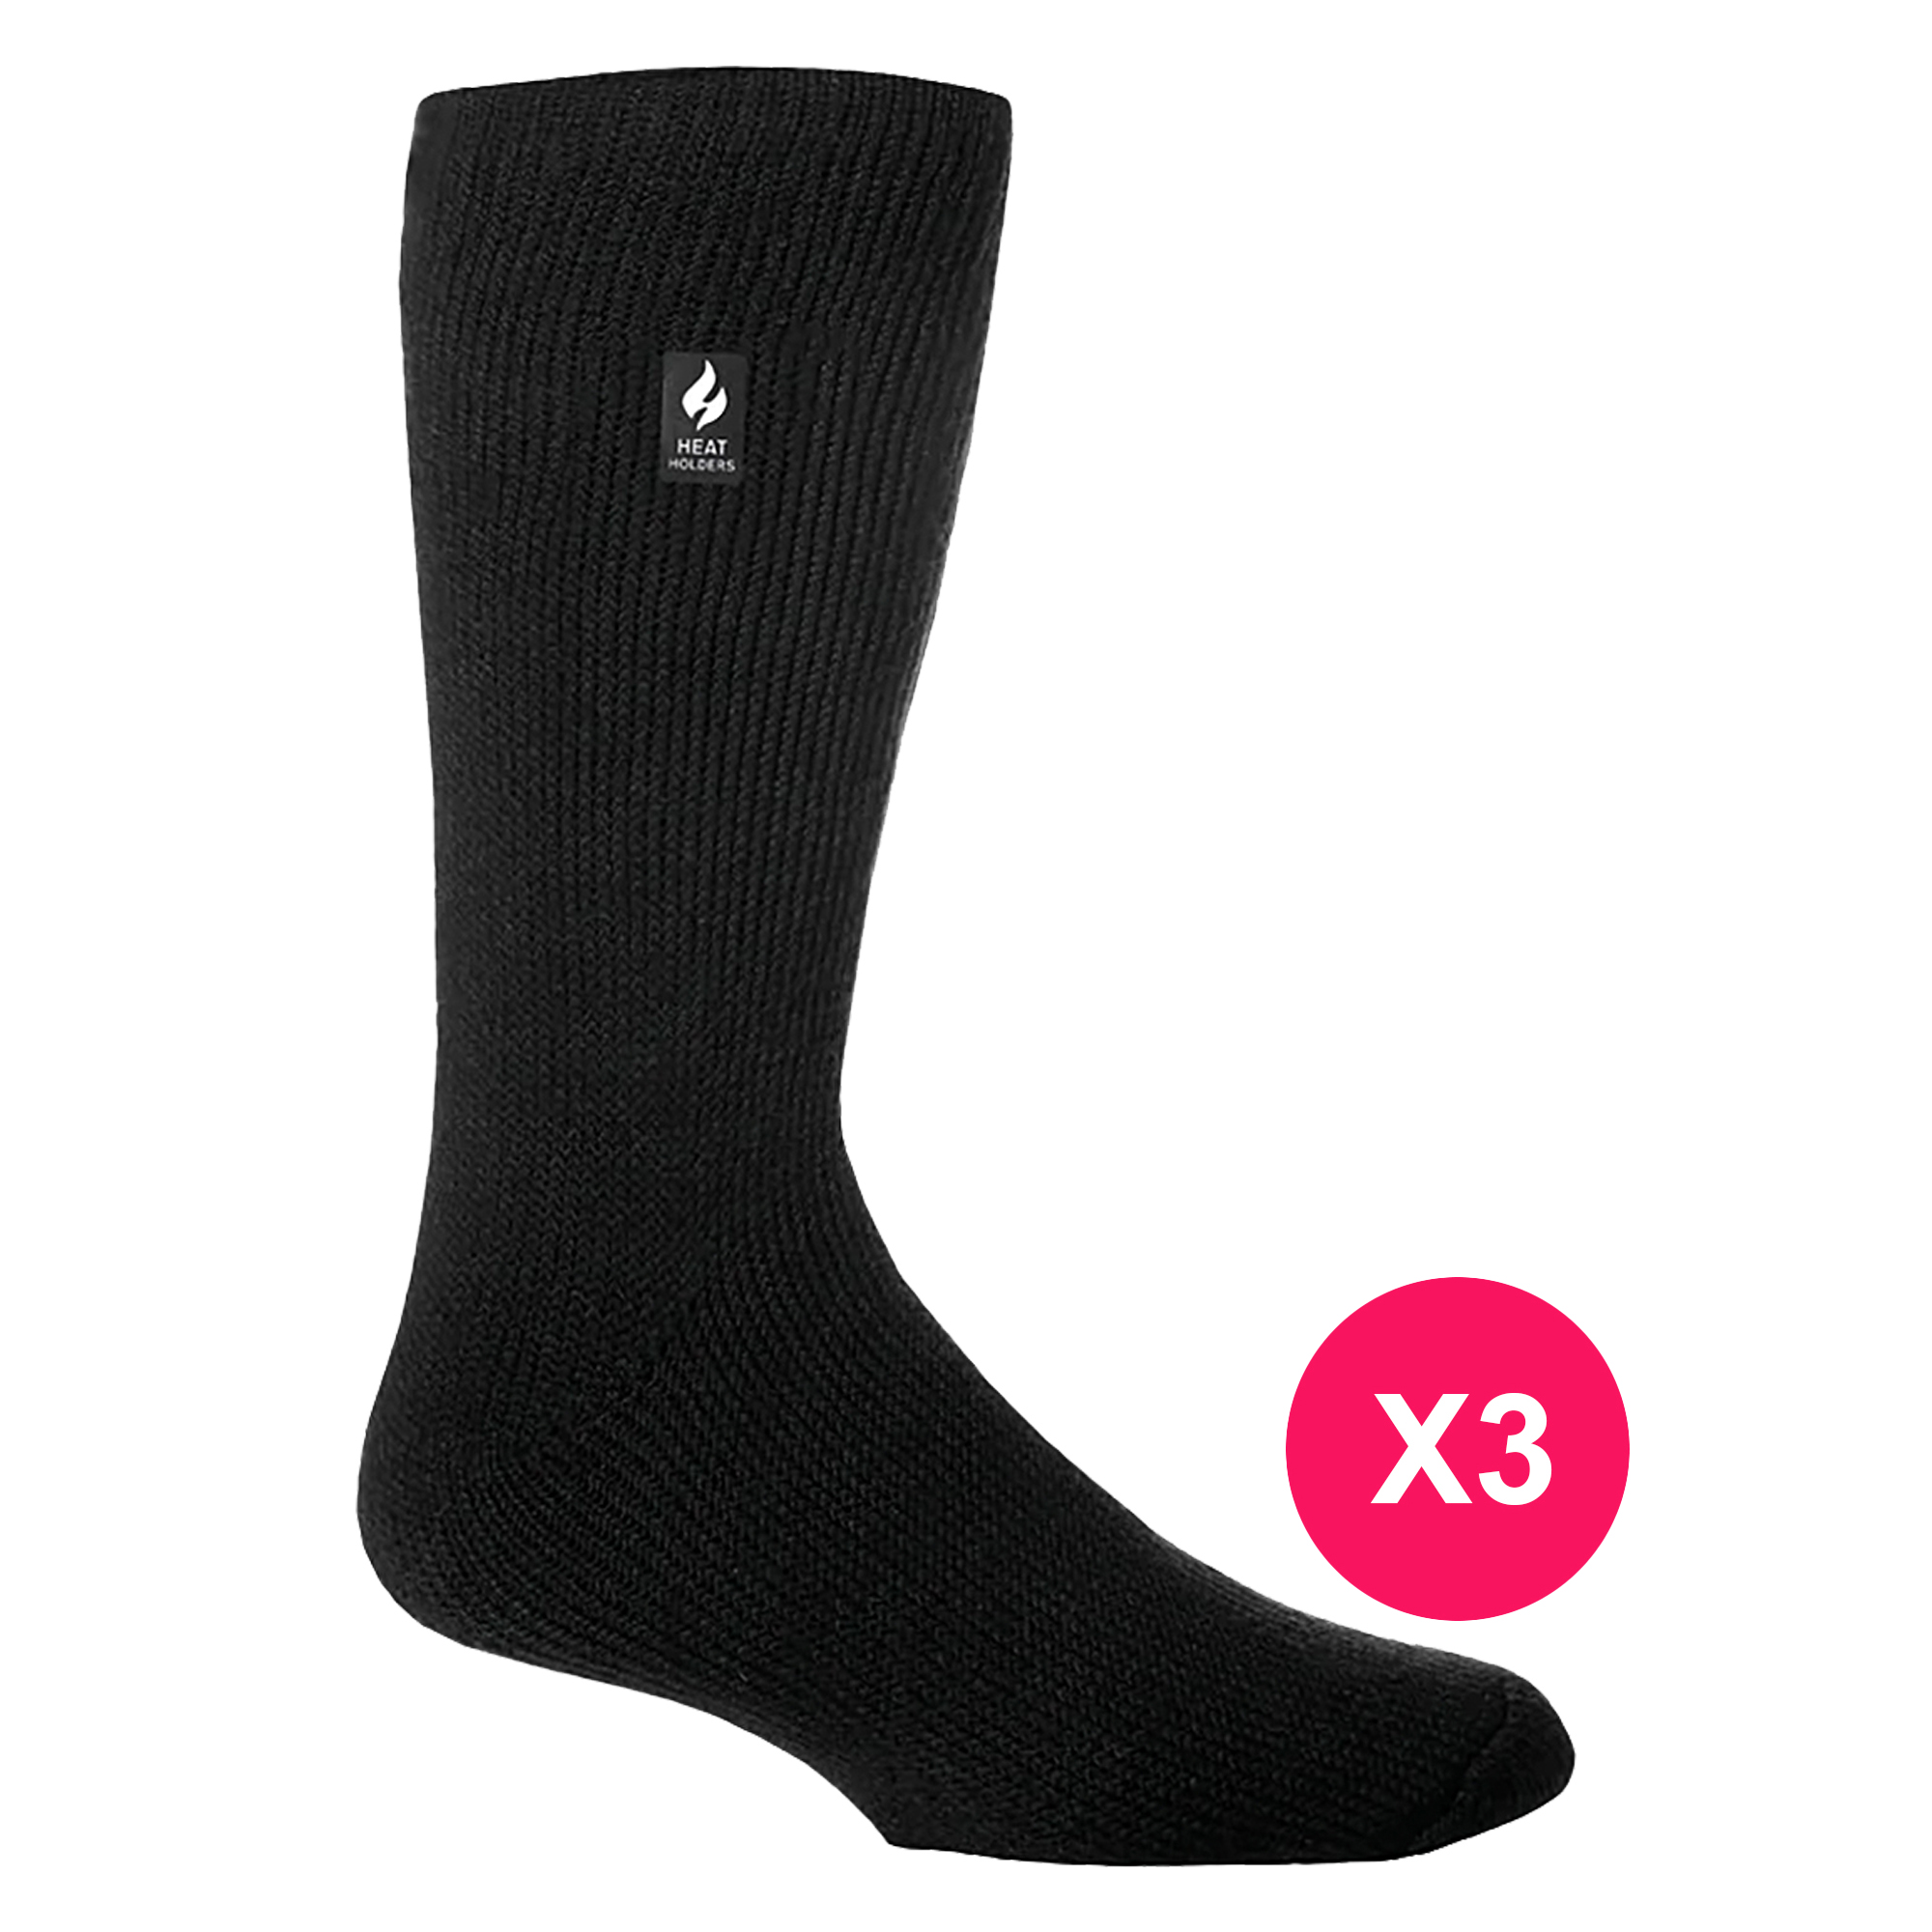 Mens Thermal Socks by Heat Holders | 2.34 TOG Rating